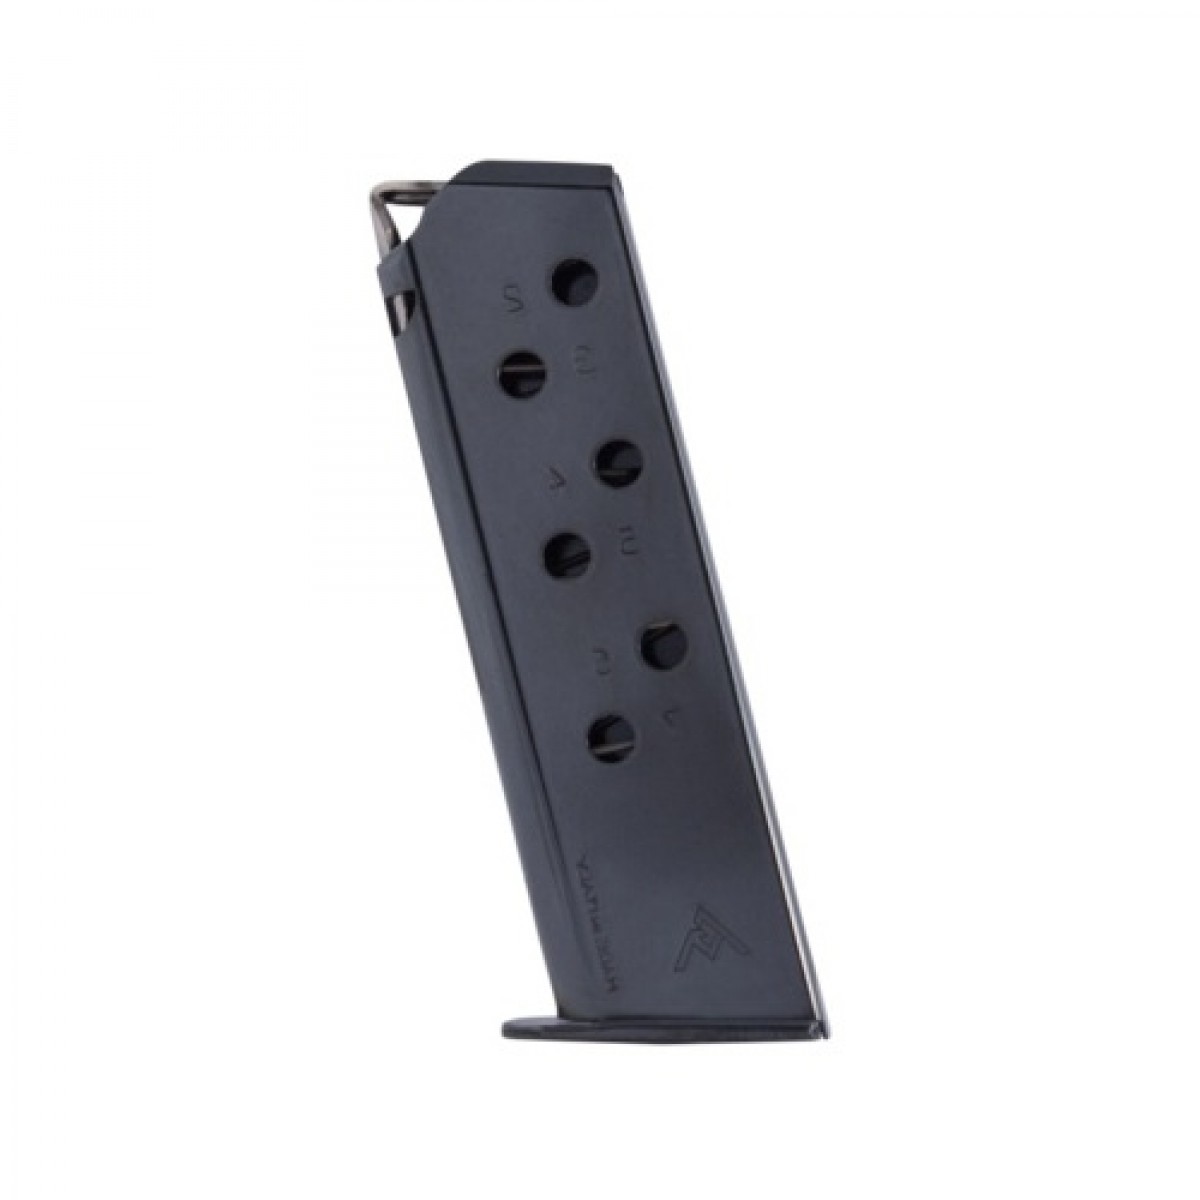 INV#69 4 WALTHER PP PPK/S .380 ACP 7 RD MAG MAGAZINE 